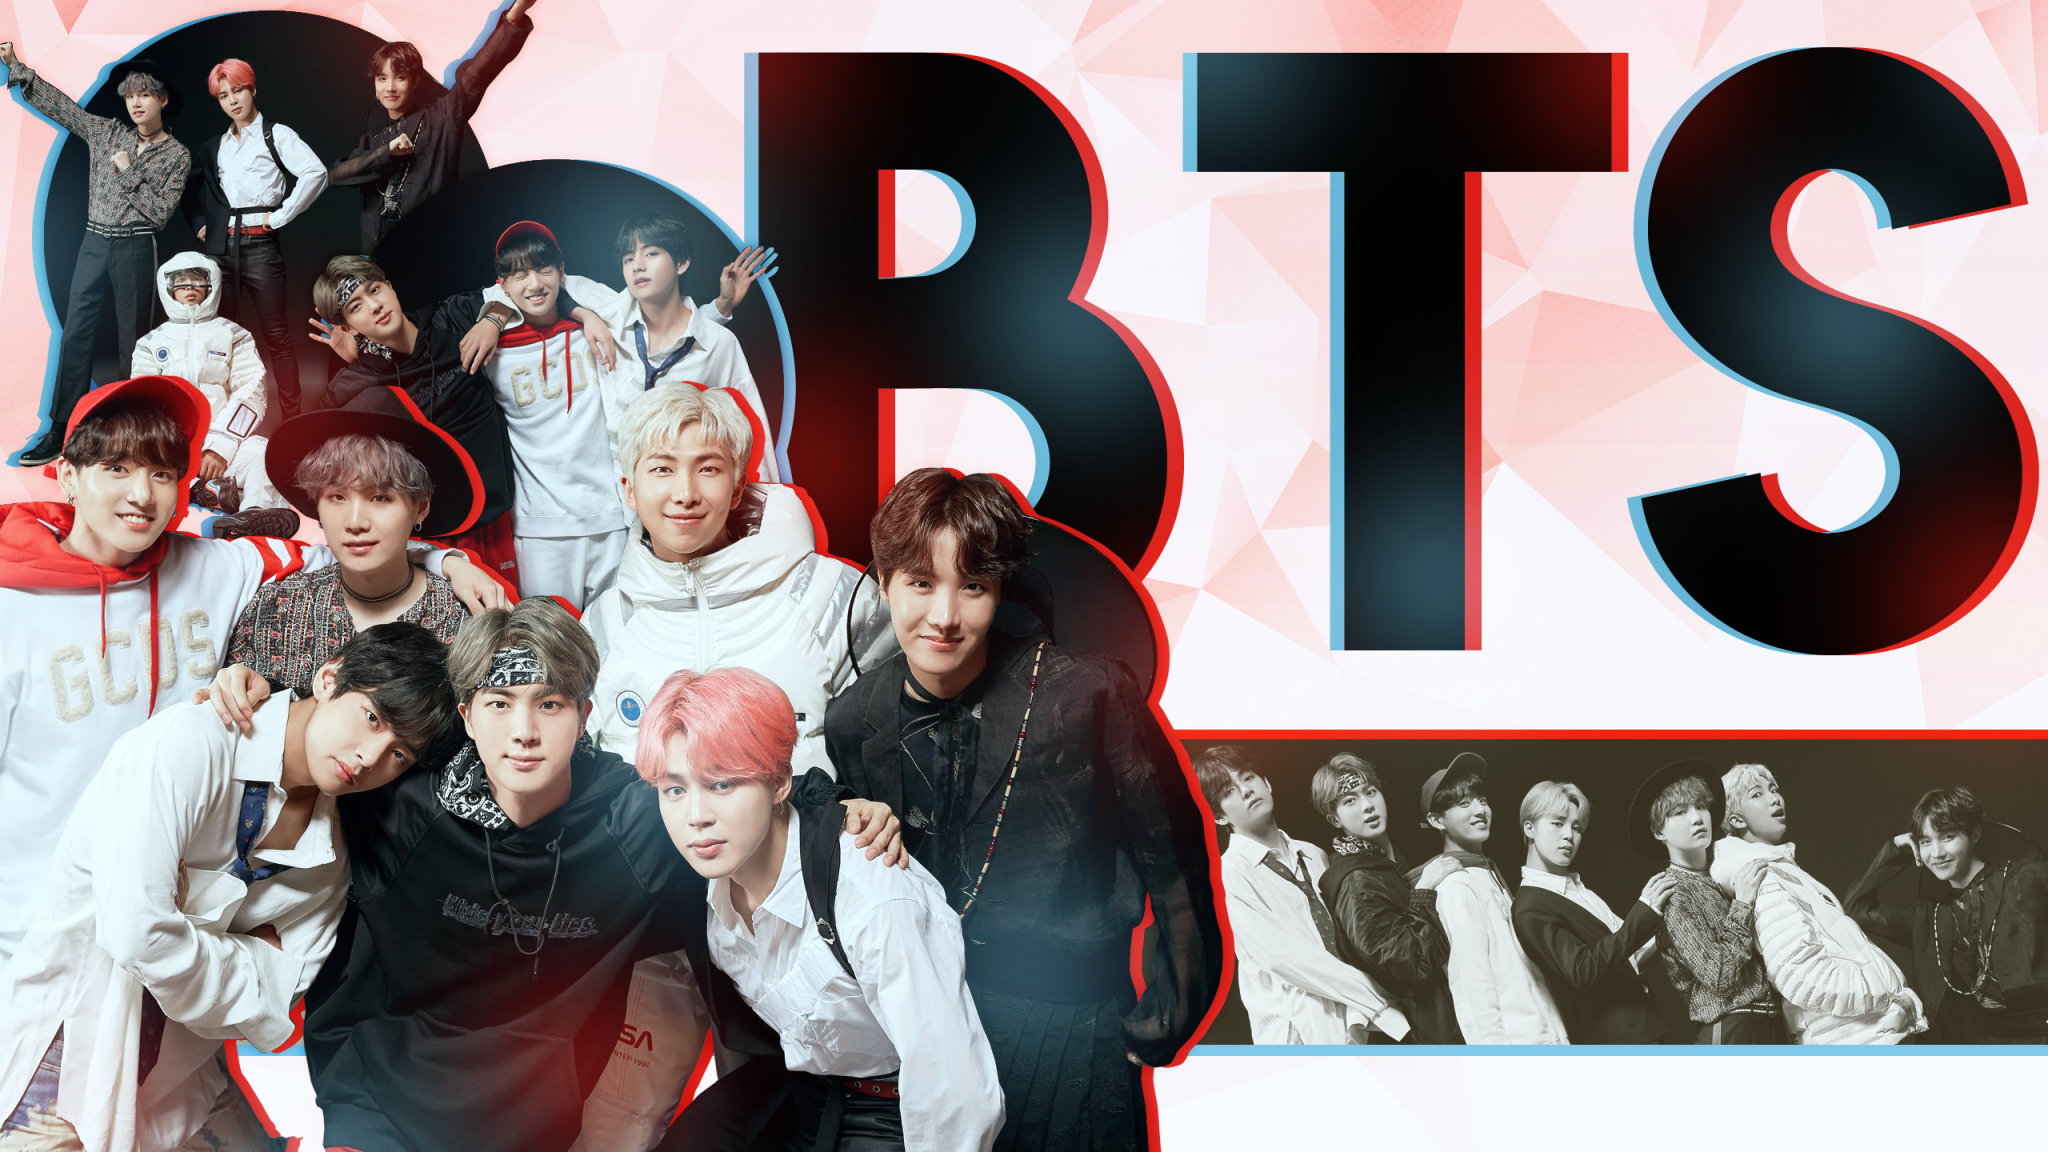 BTS_Wallpaper_FeelinAliveDesigns_002.png